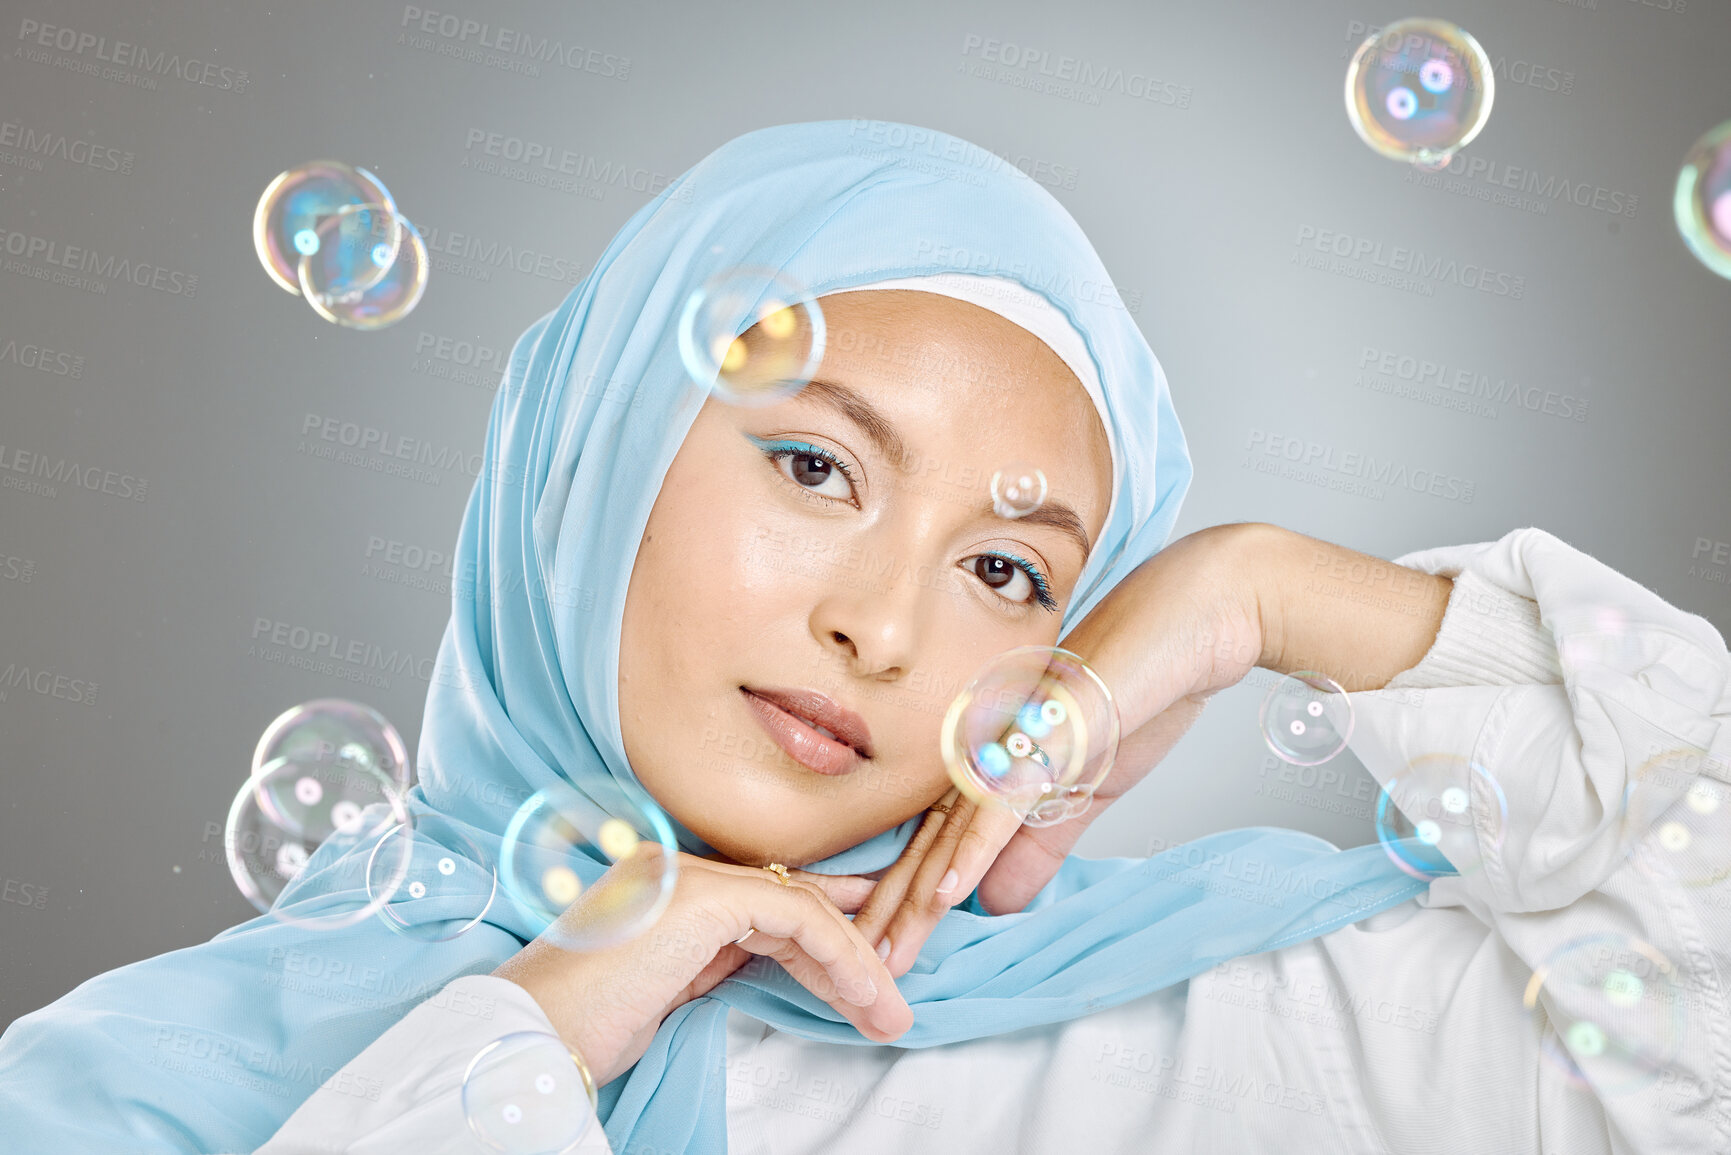 Buy stock photo Portrait of a beautiful muslim woman wearing blue hijab headscarf against grey background. Arab female in a happy daydream and fantasy surrounded by the pure delight and innocence of playful bubbles